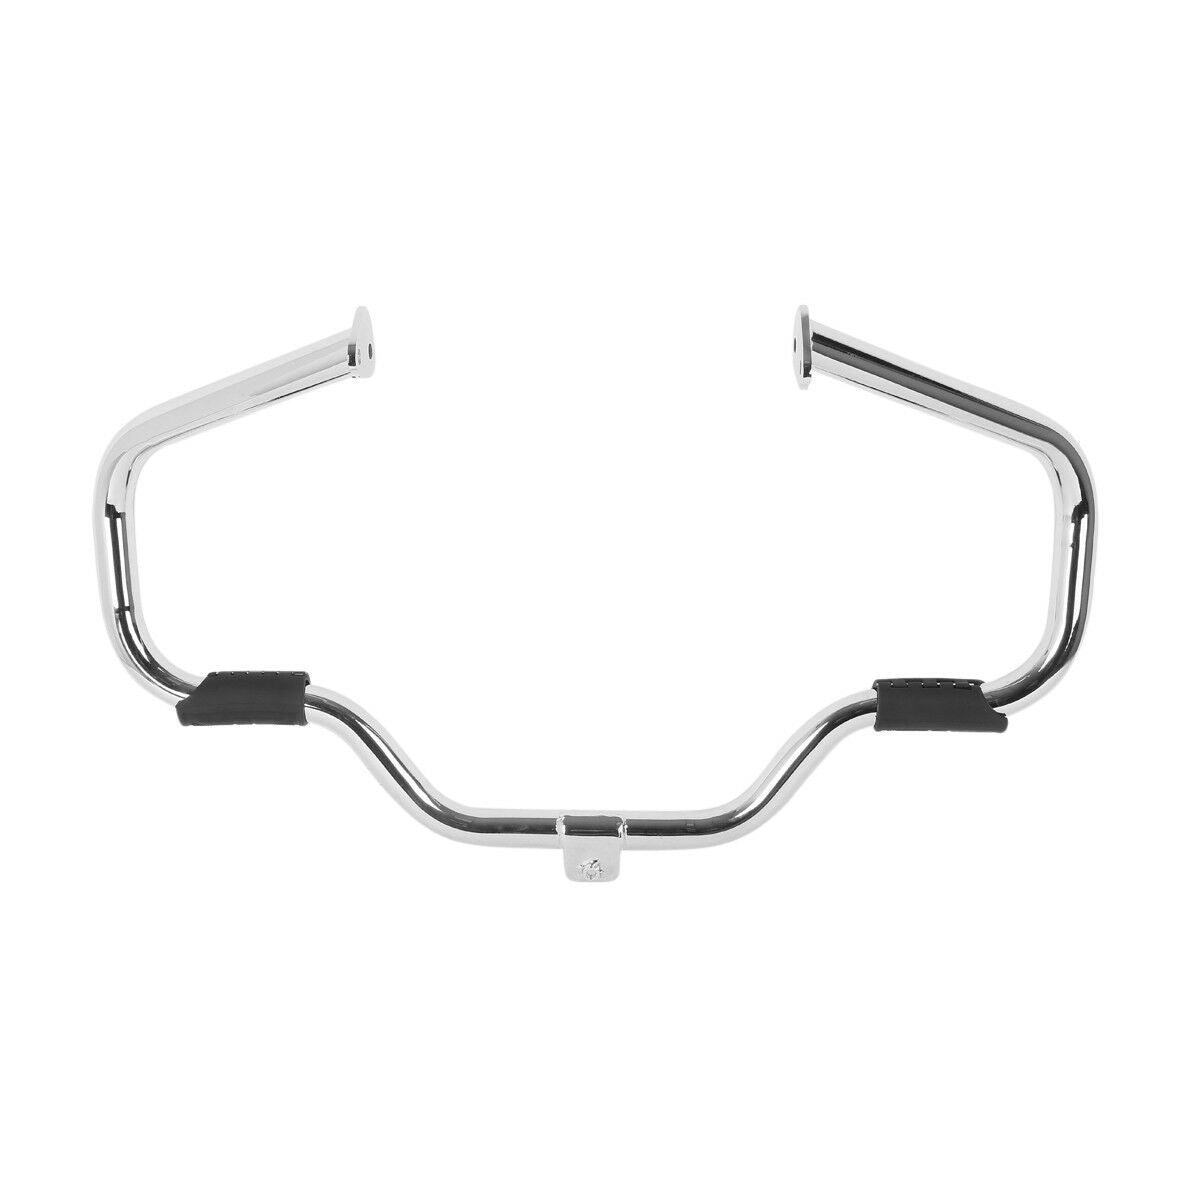 Chrome Mustache Engine Guard Crash Bar Fit For Harley Touring Road Glide 97-08 - Moto Life Products